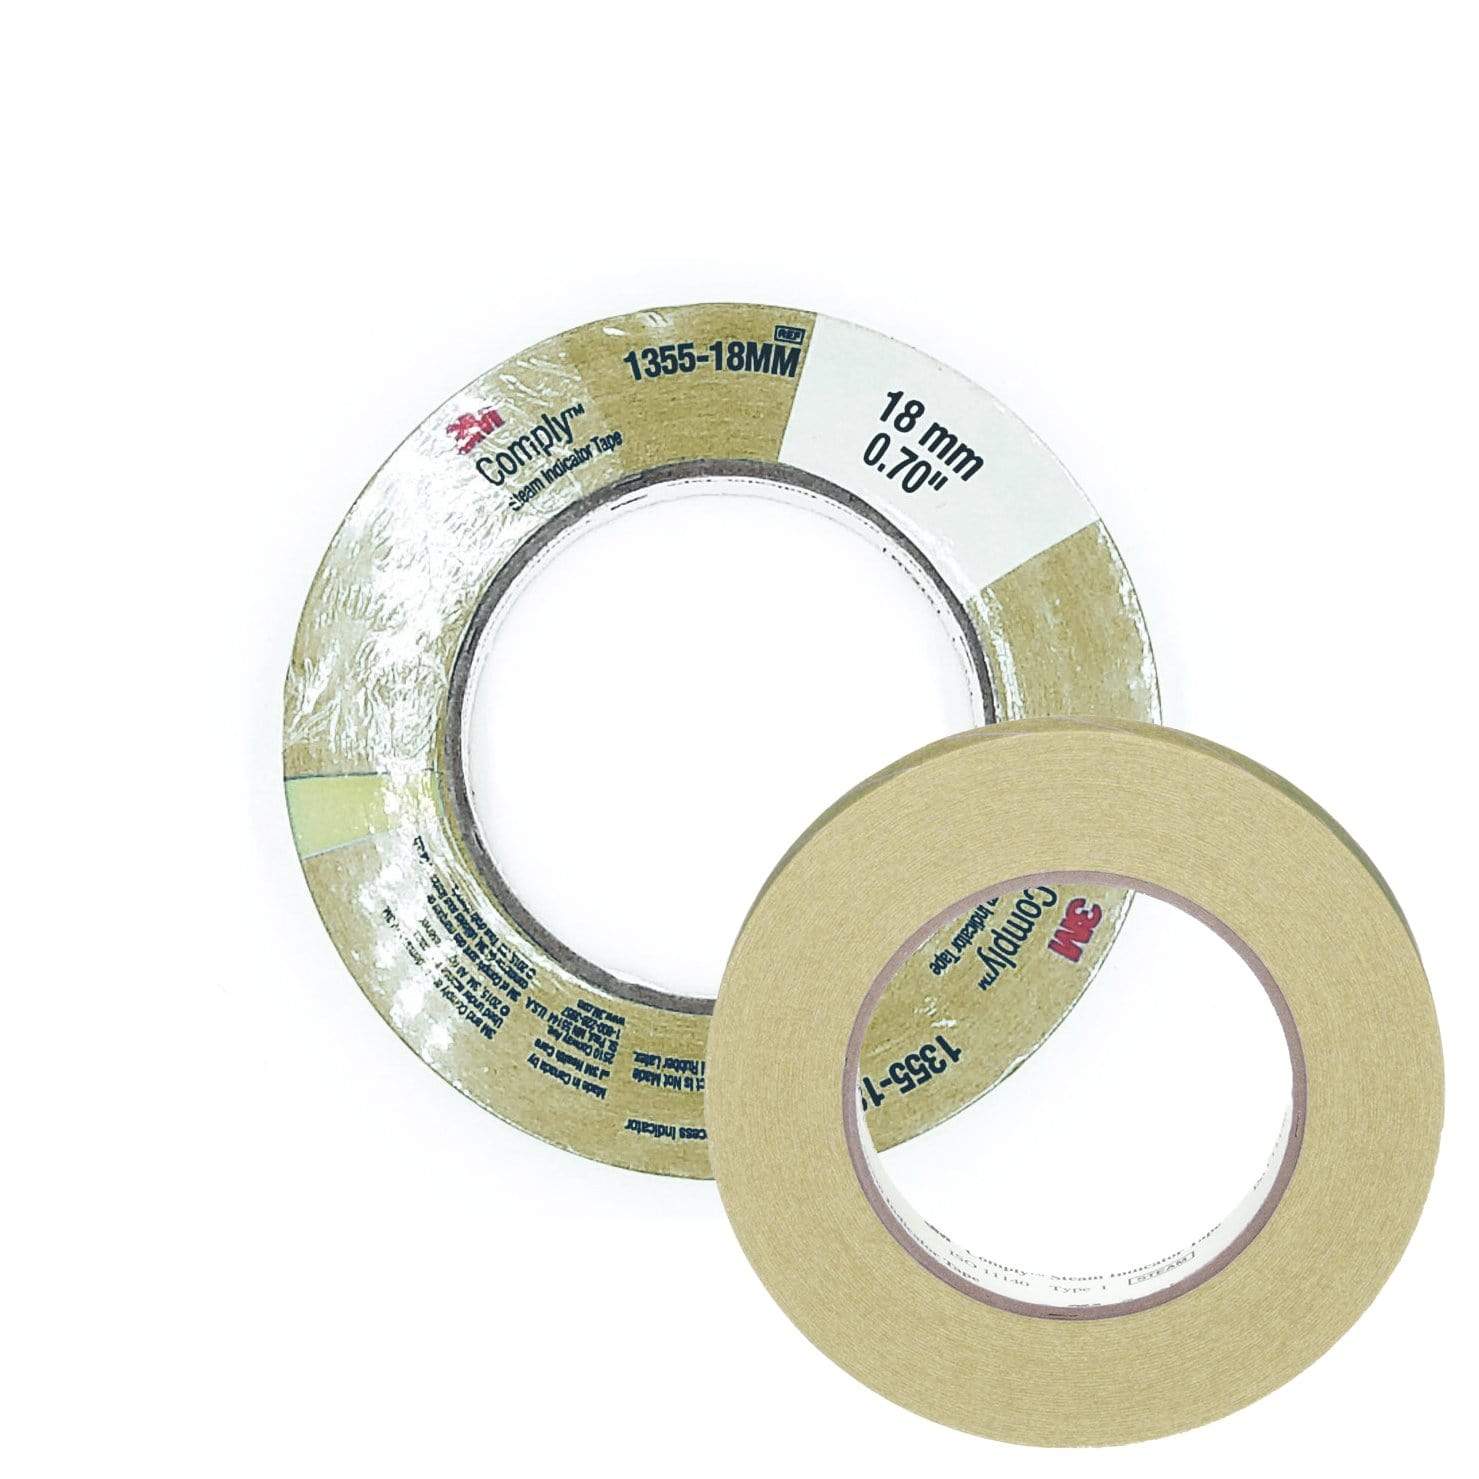 3M Comply Steam Process Indicator Tape